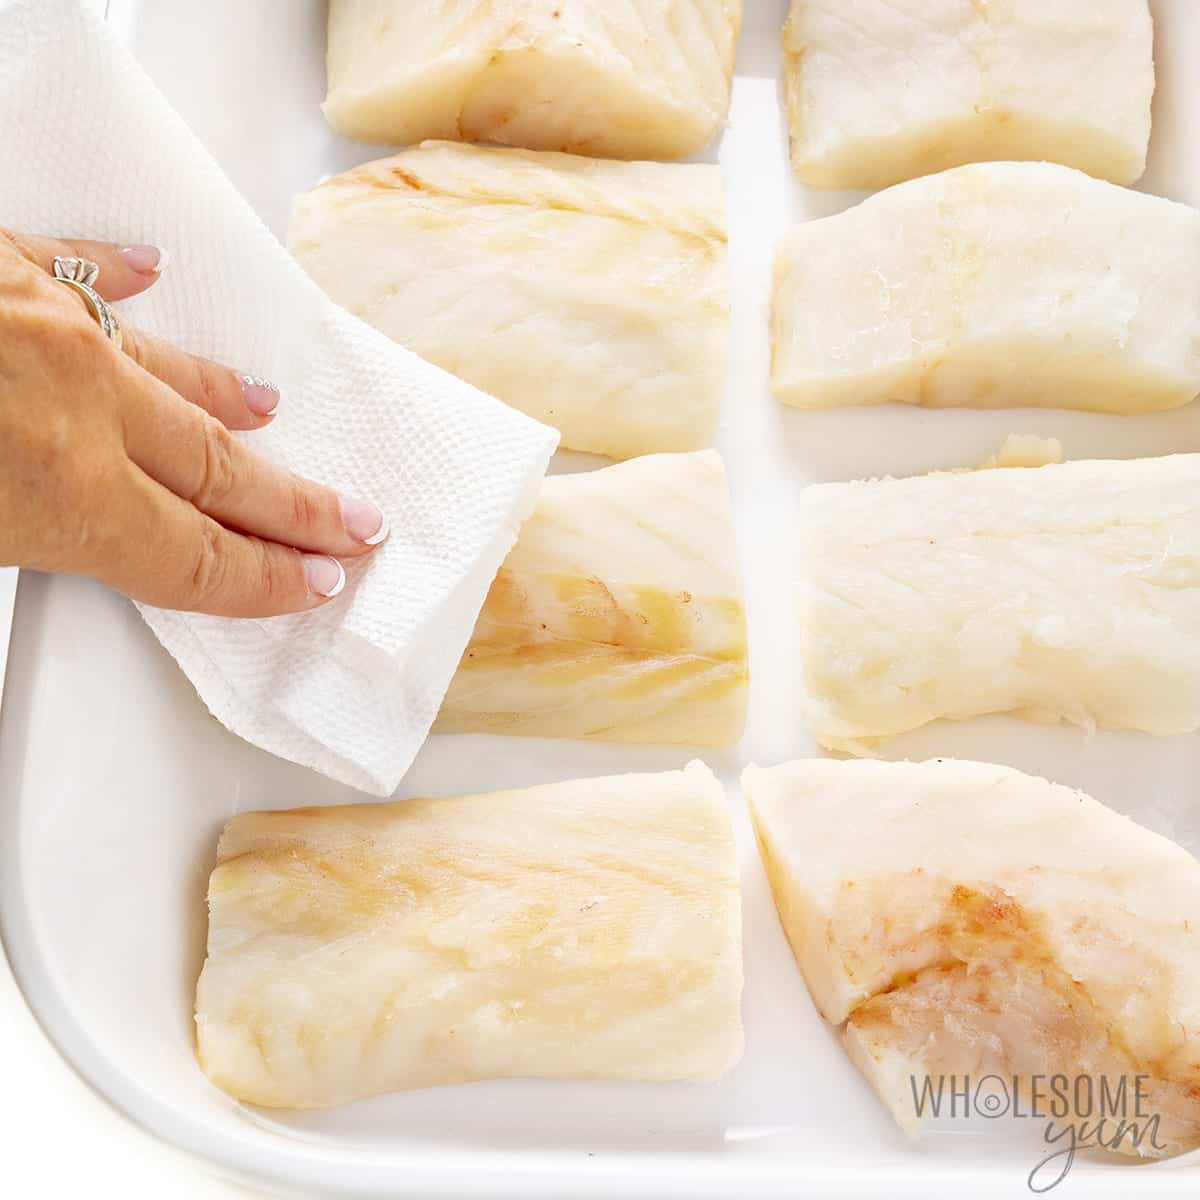 Cod filets patted dry